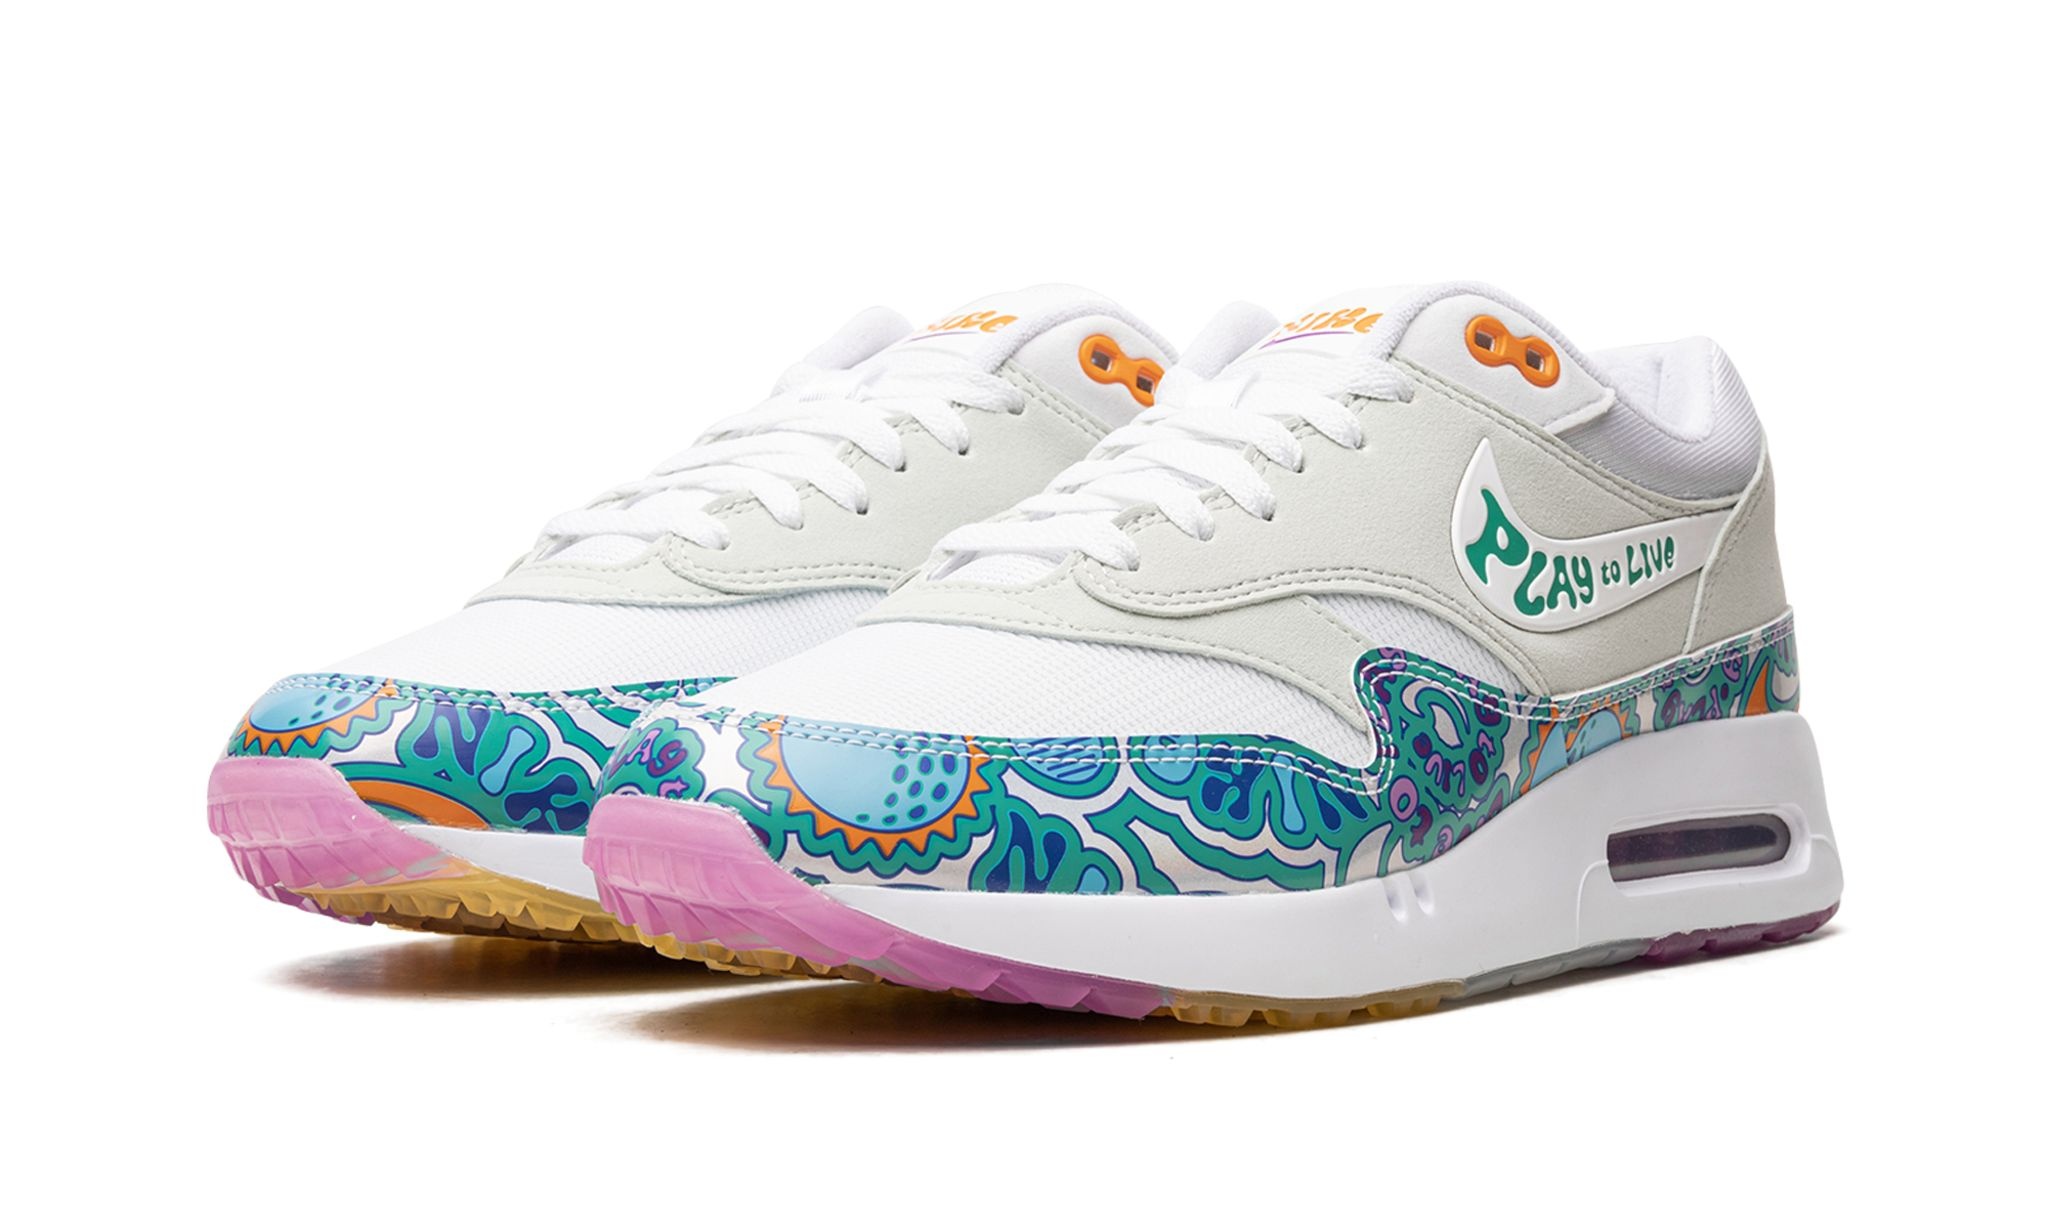 Air Max 1 Golf "Play To Live" - 2